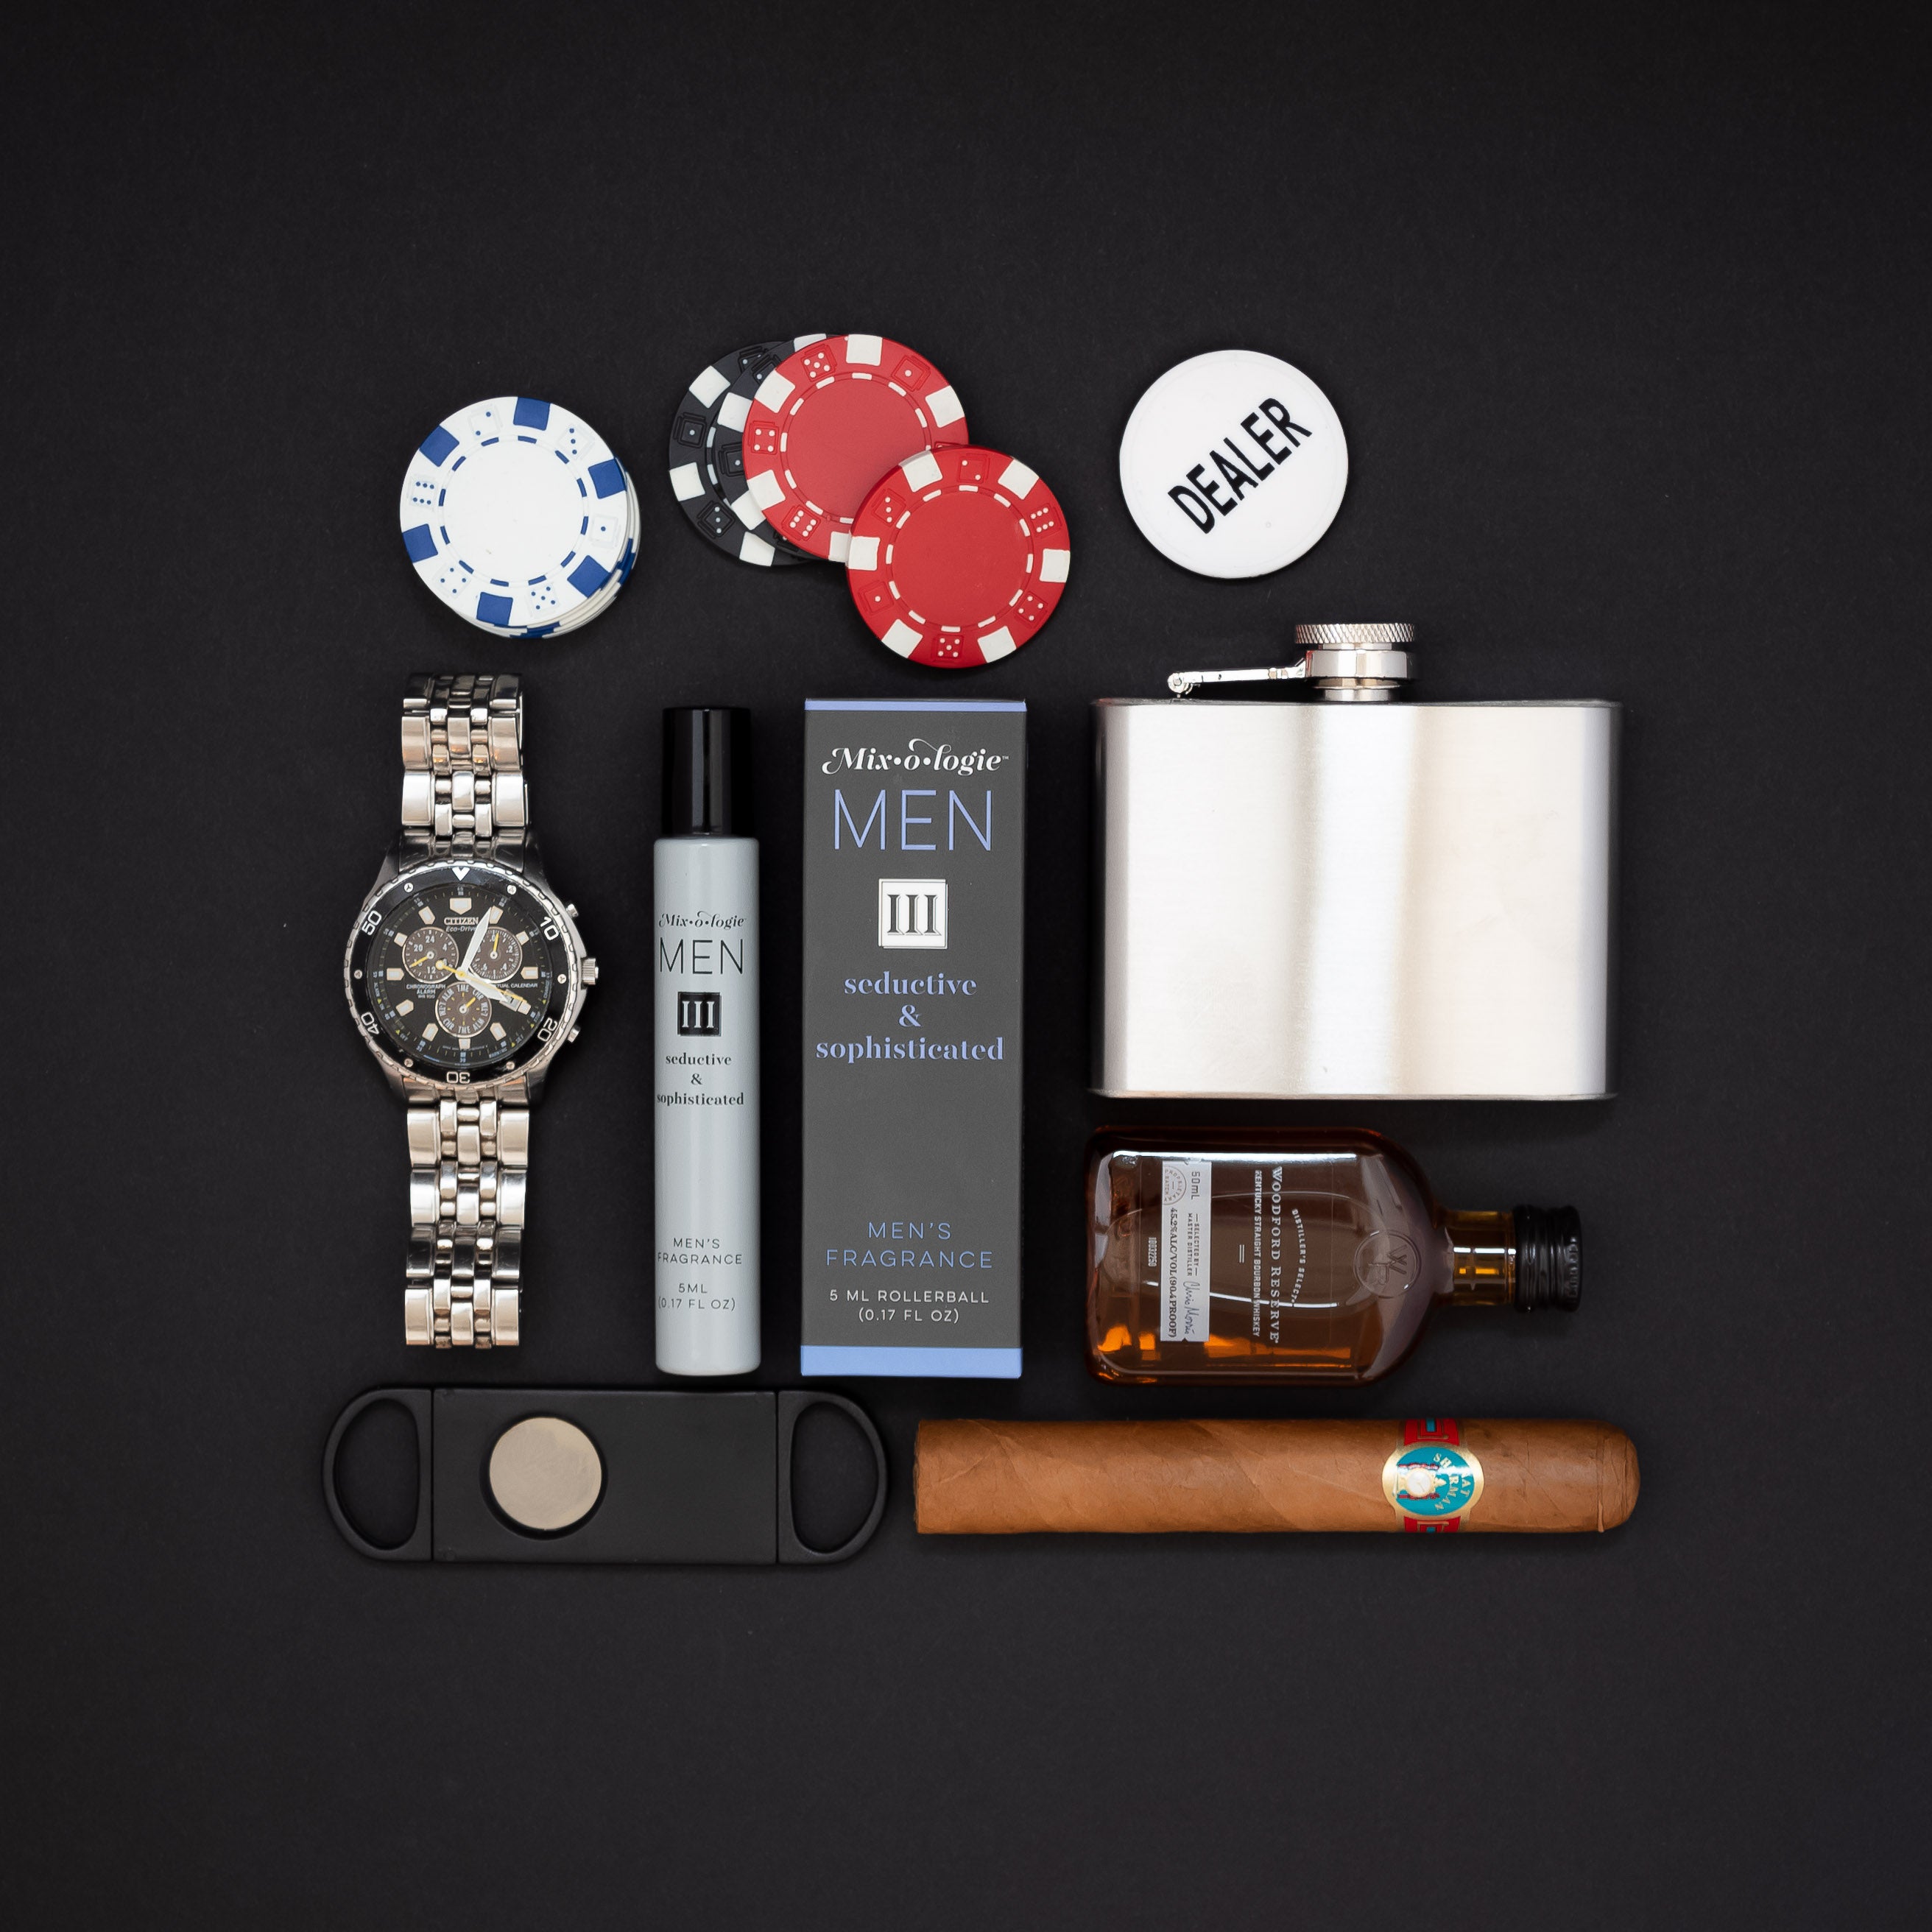 Mixologie rollerball scented with Men's III (seductive & sophisticated) fragrance in 5 mL glass bottle displayed with whiskey, cigar, watch, and poker chips.